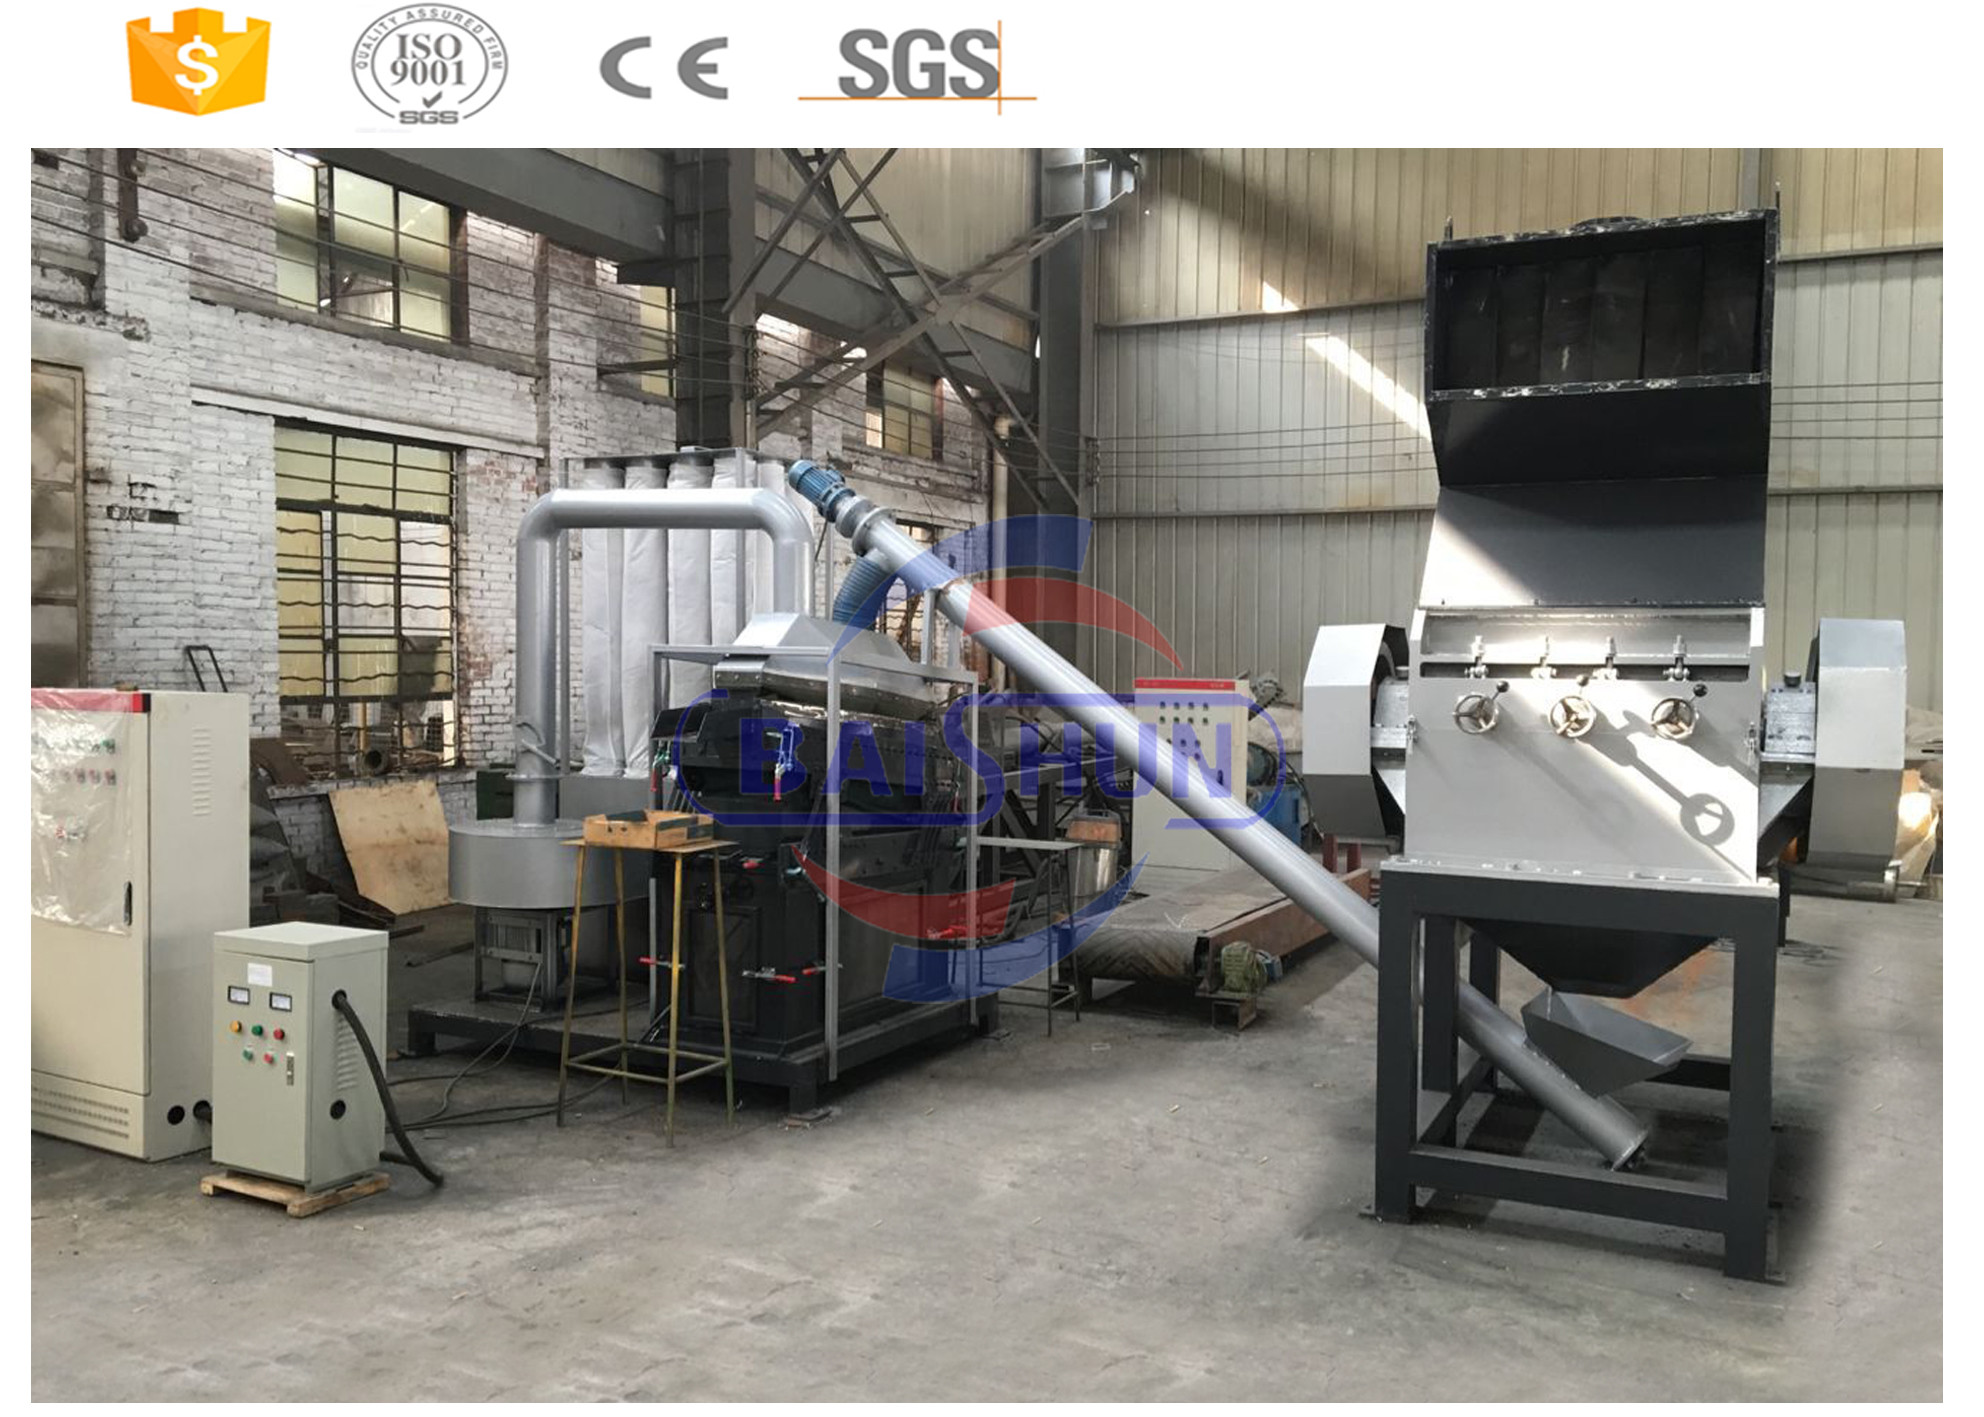  Electric Scrap Copper Wire Recycling Machine Overall Structure Easy To Install Manufactures